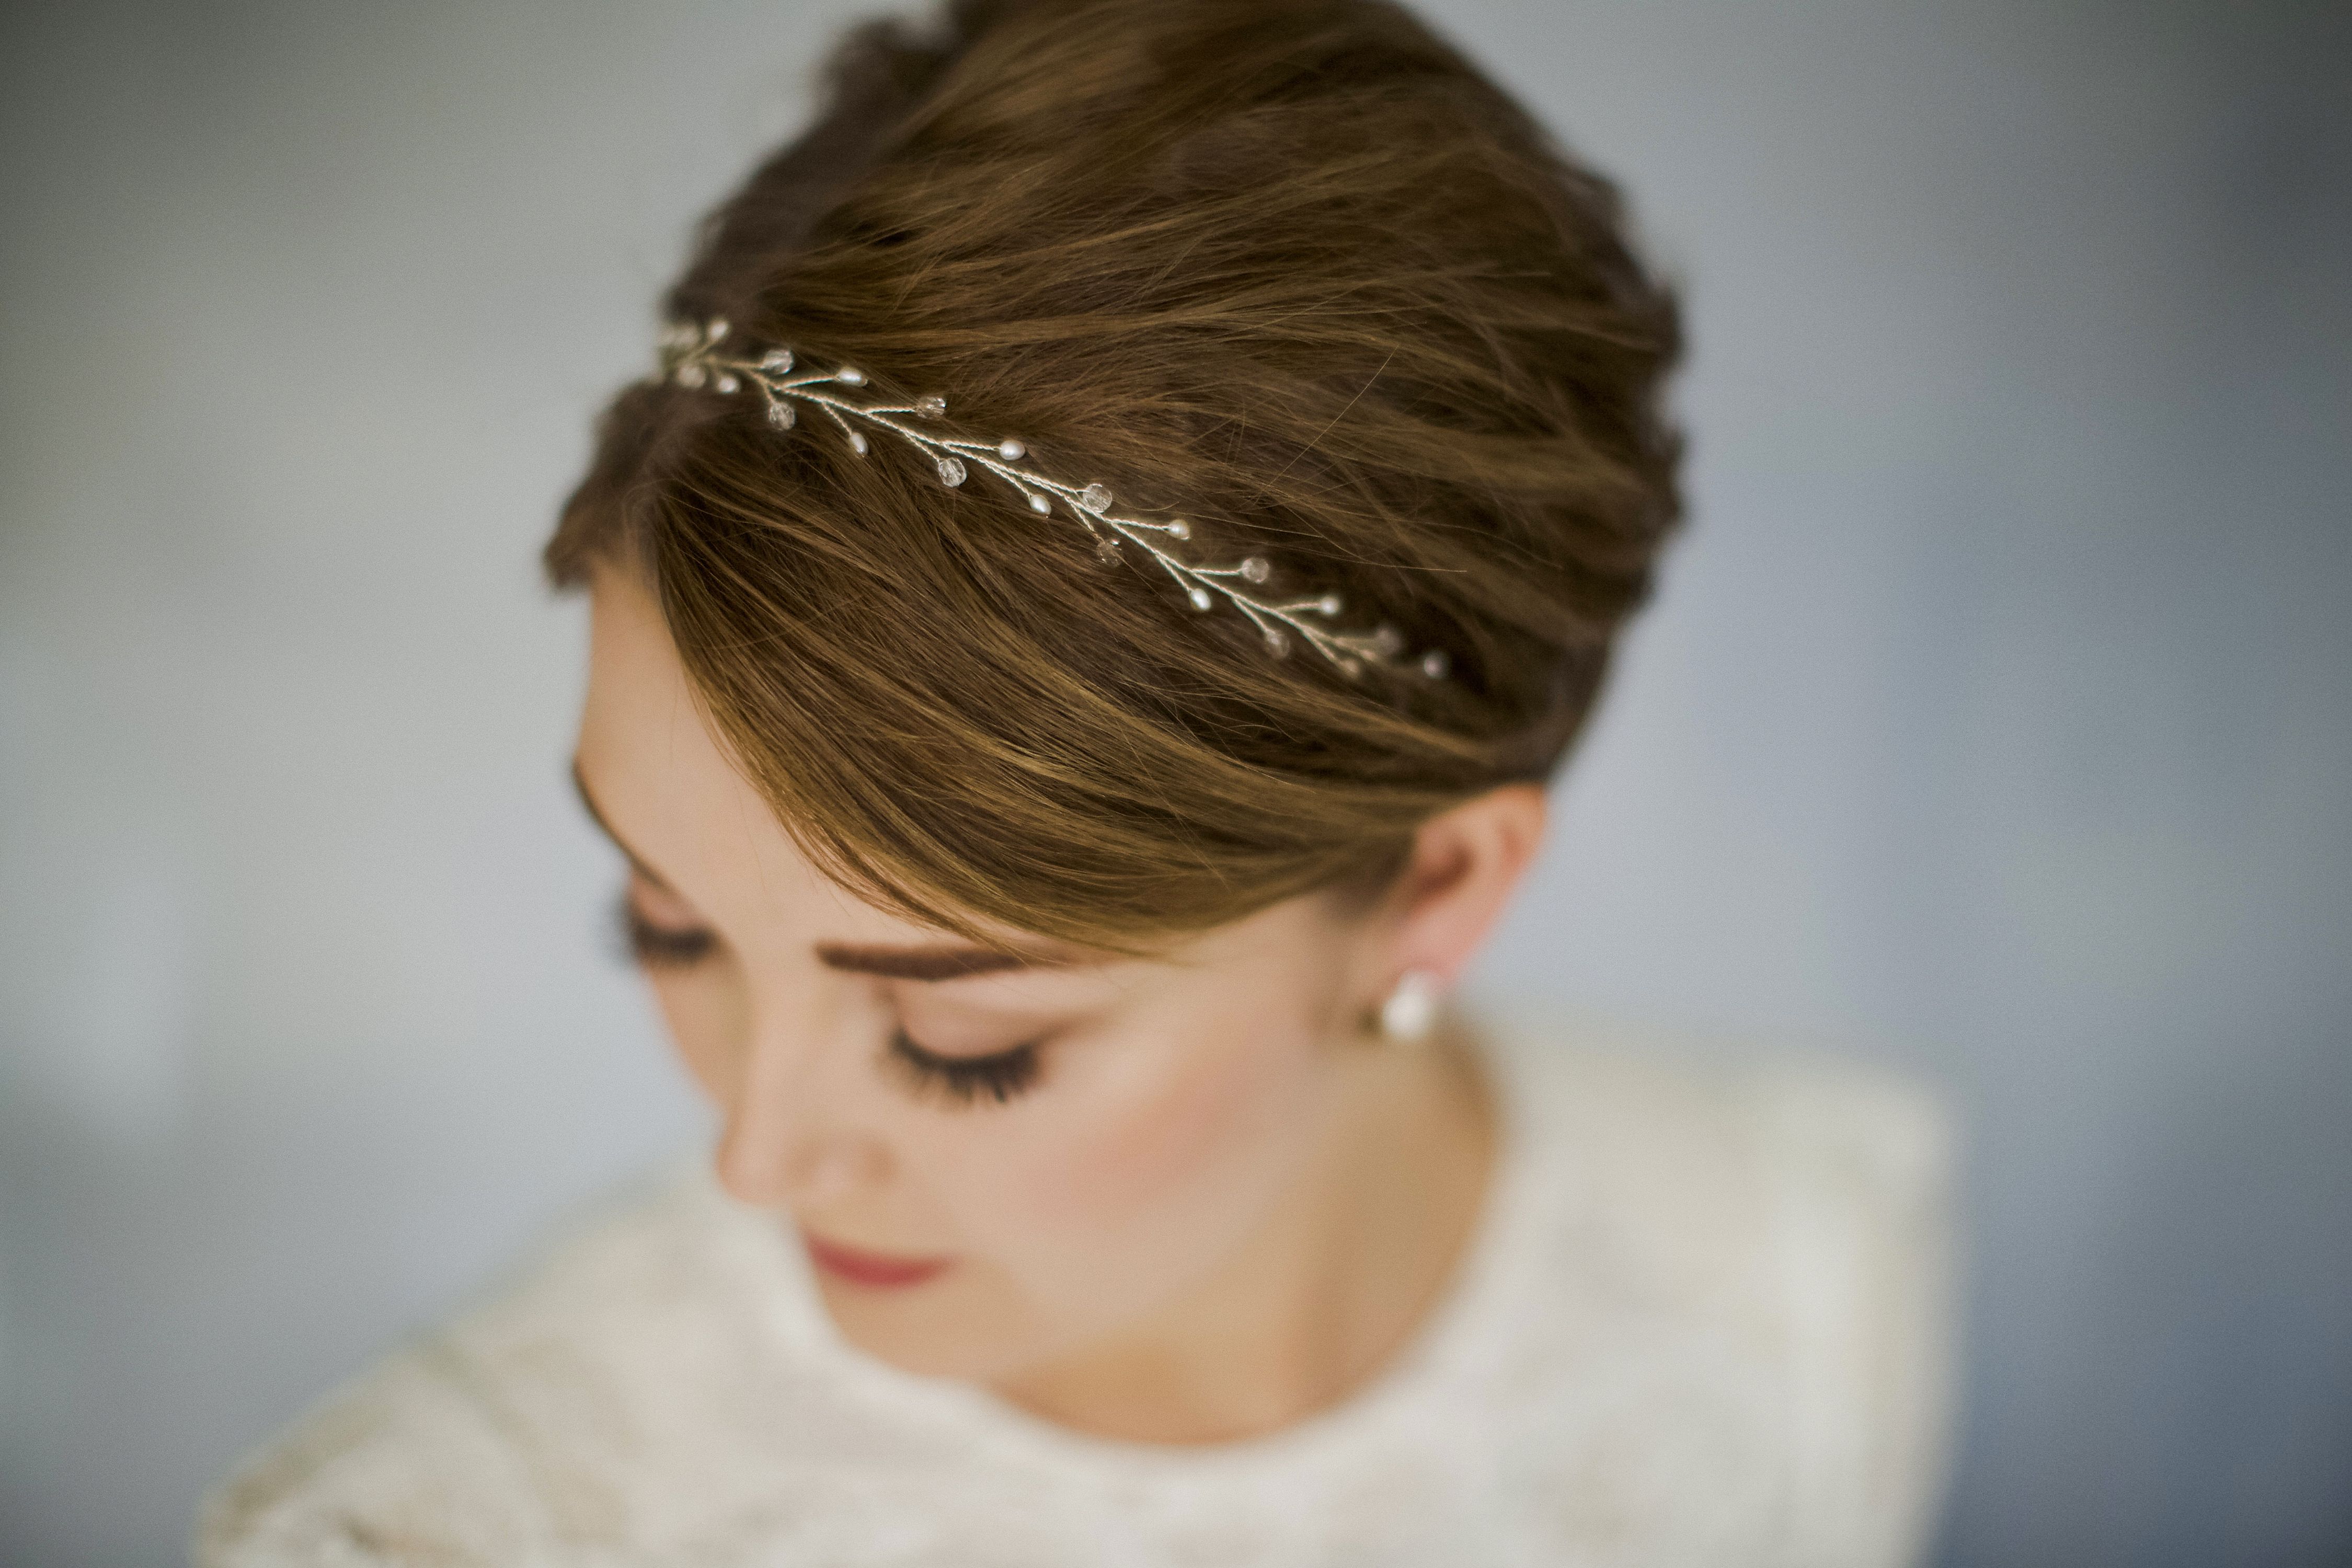 How To Style Wedding Hair Accessories With Short Hair | Love My Throughout Short Hairstyles With Headband (View 23 of 25)